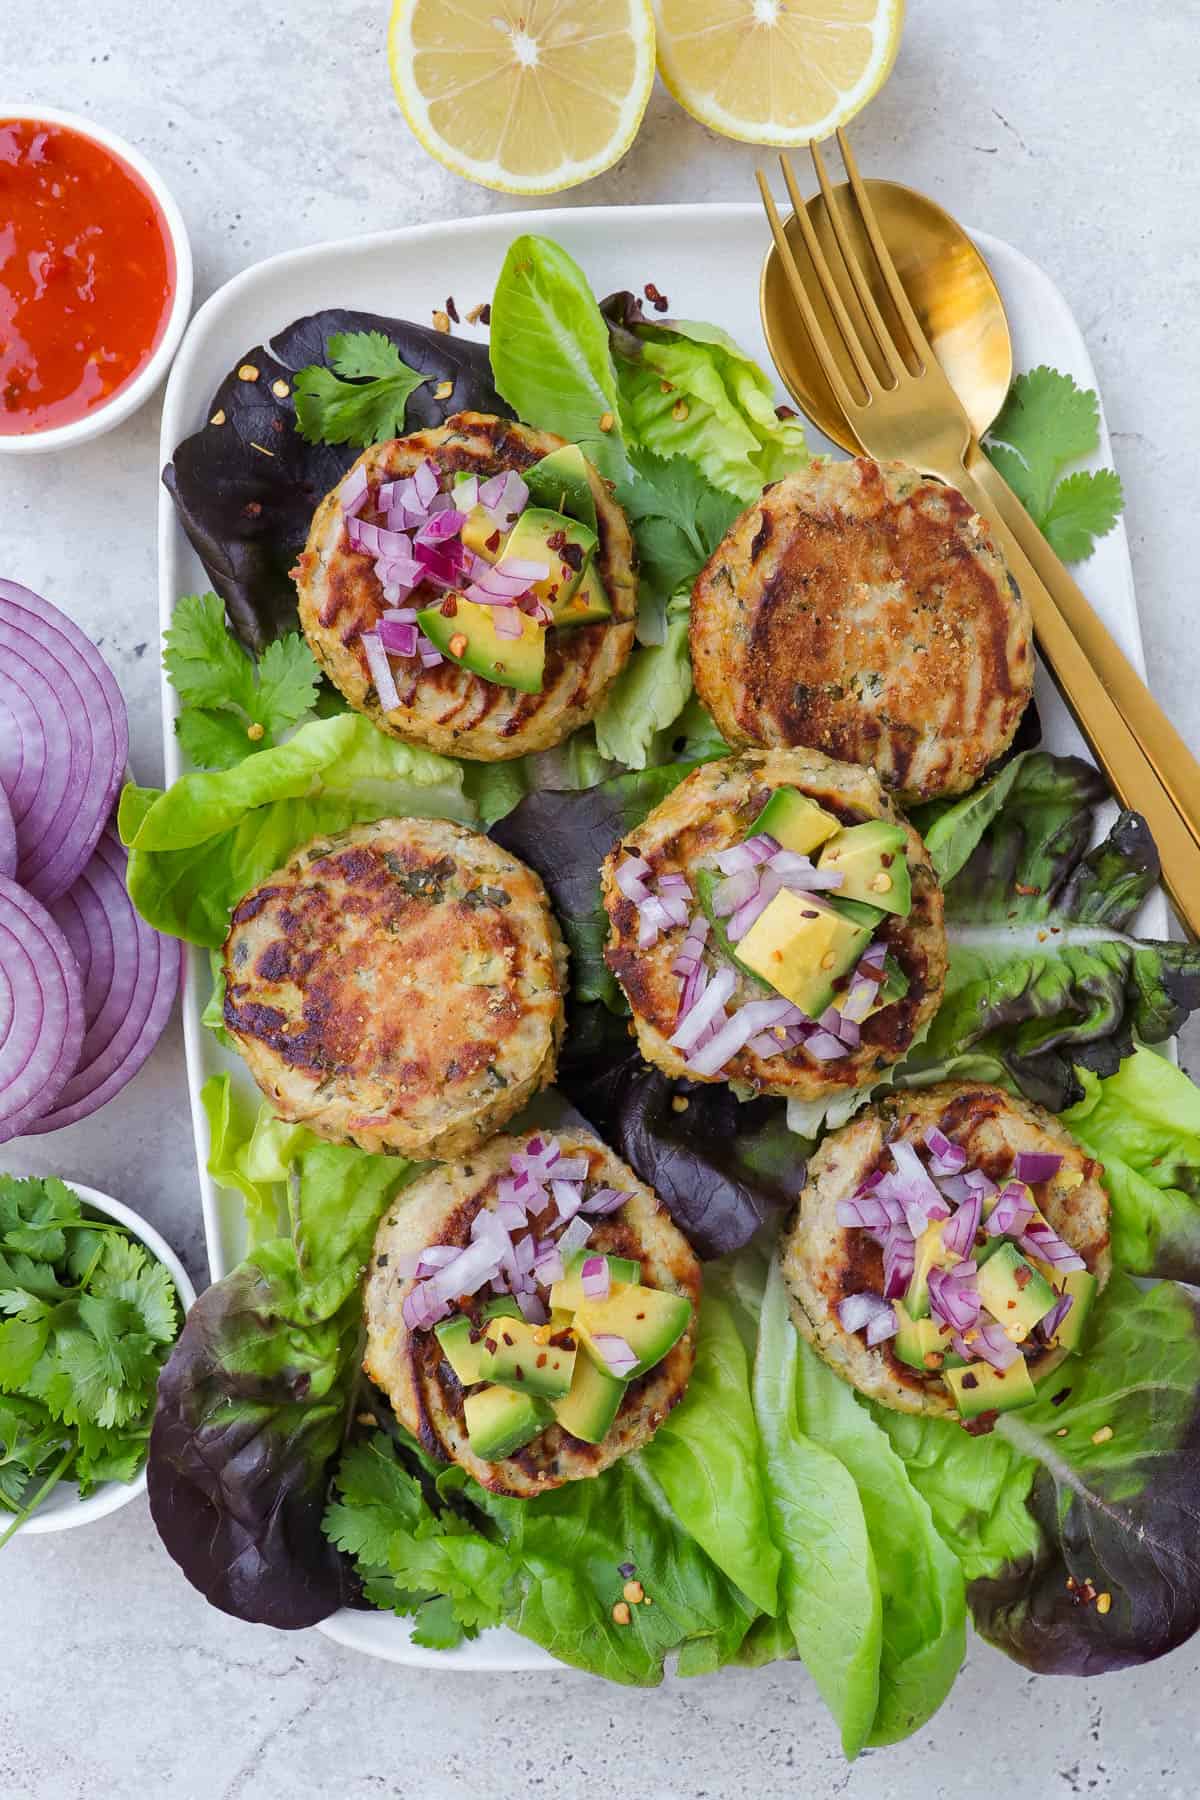 Tuna cakes on lettuce leaves with chopped avocado, red onion and chili flakes on top of some. Sliced red onion, coriander leaves, sweet chilli sauce and lemons on the side for decoration.